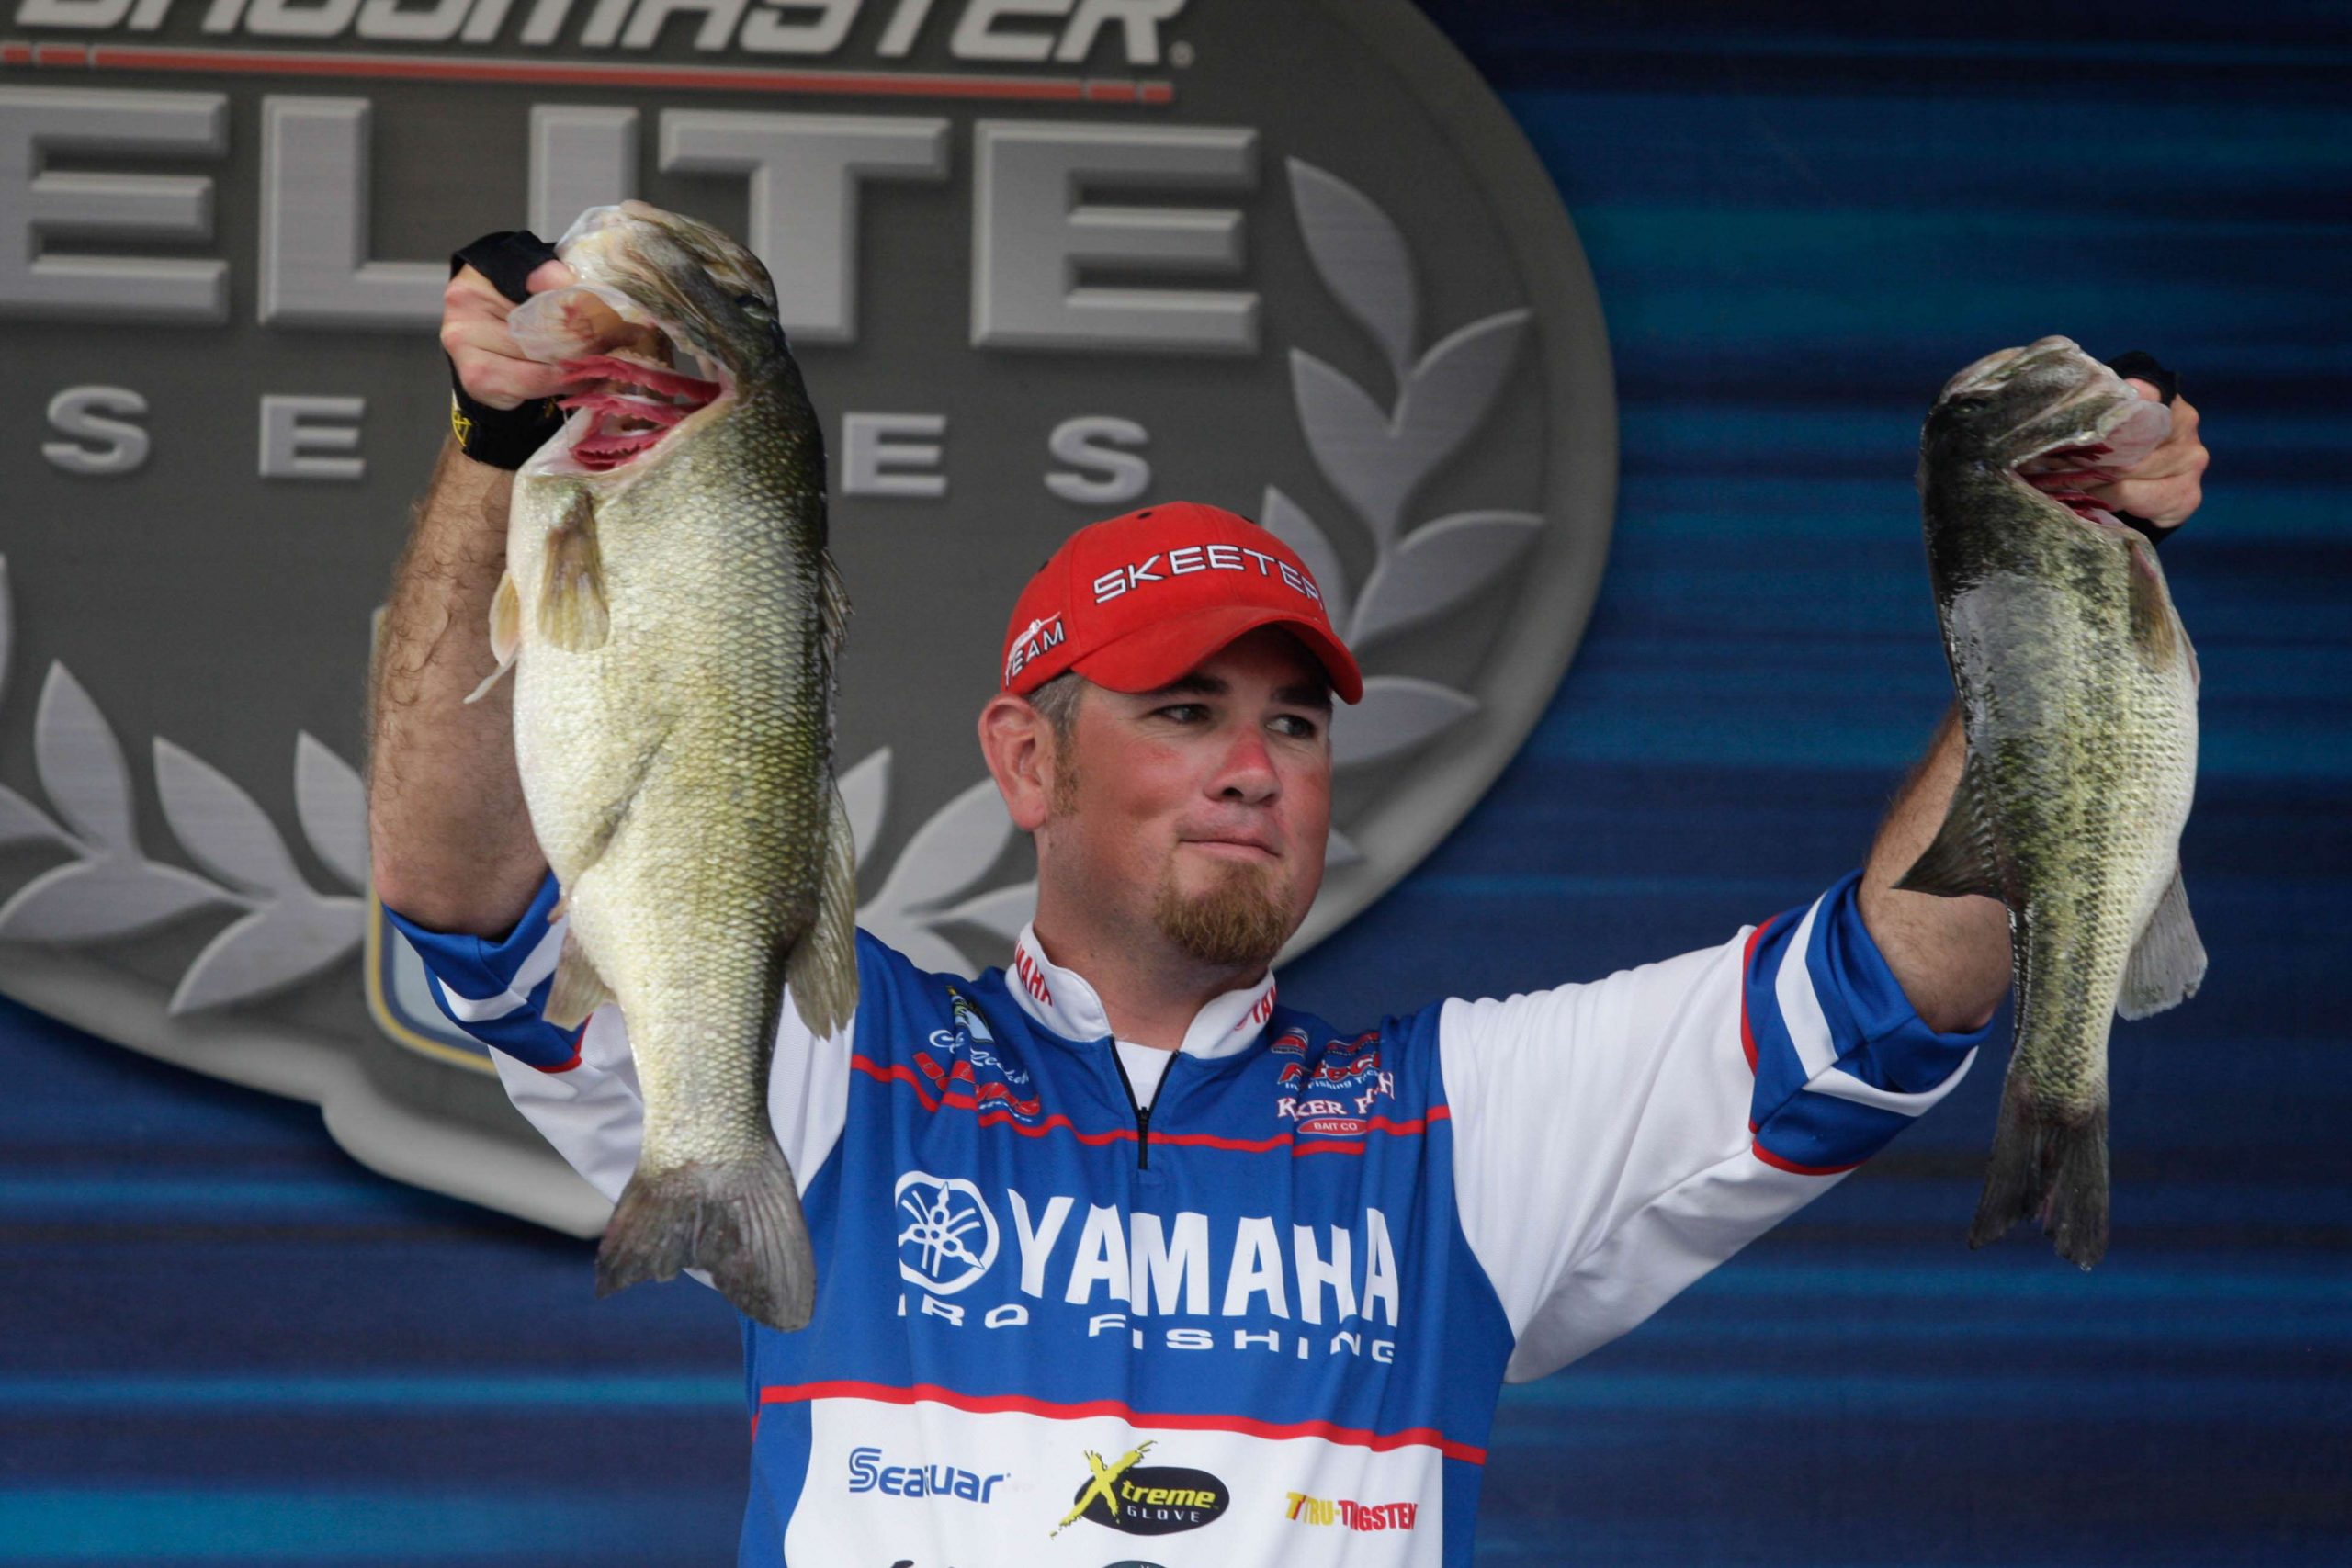 Clark Reehm caught the biggest bass of the tournament, a 9-2. He caught it casting to shallow rocks near milfoil in 6 feet of water, in the same spot where he had caught a 4-pounder earlier. He was using a 3/8-ounce Title Shot Jig with a Kicker Fish Kicker Kraw trailer.